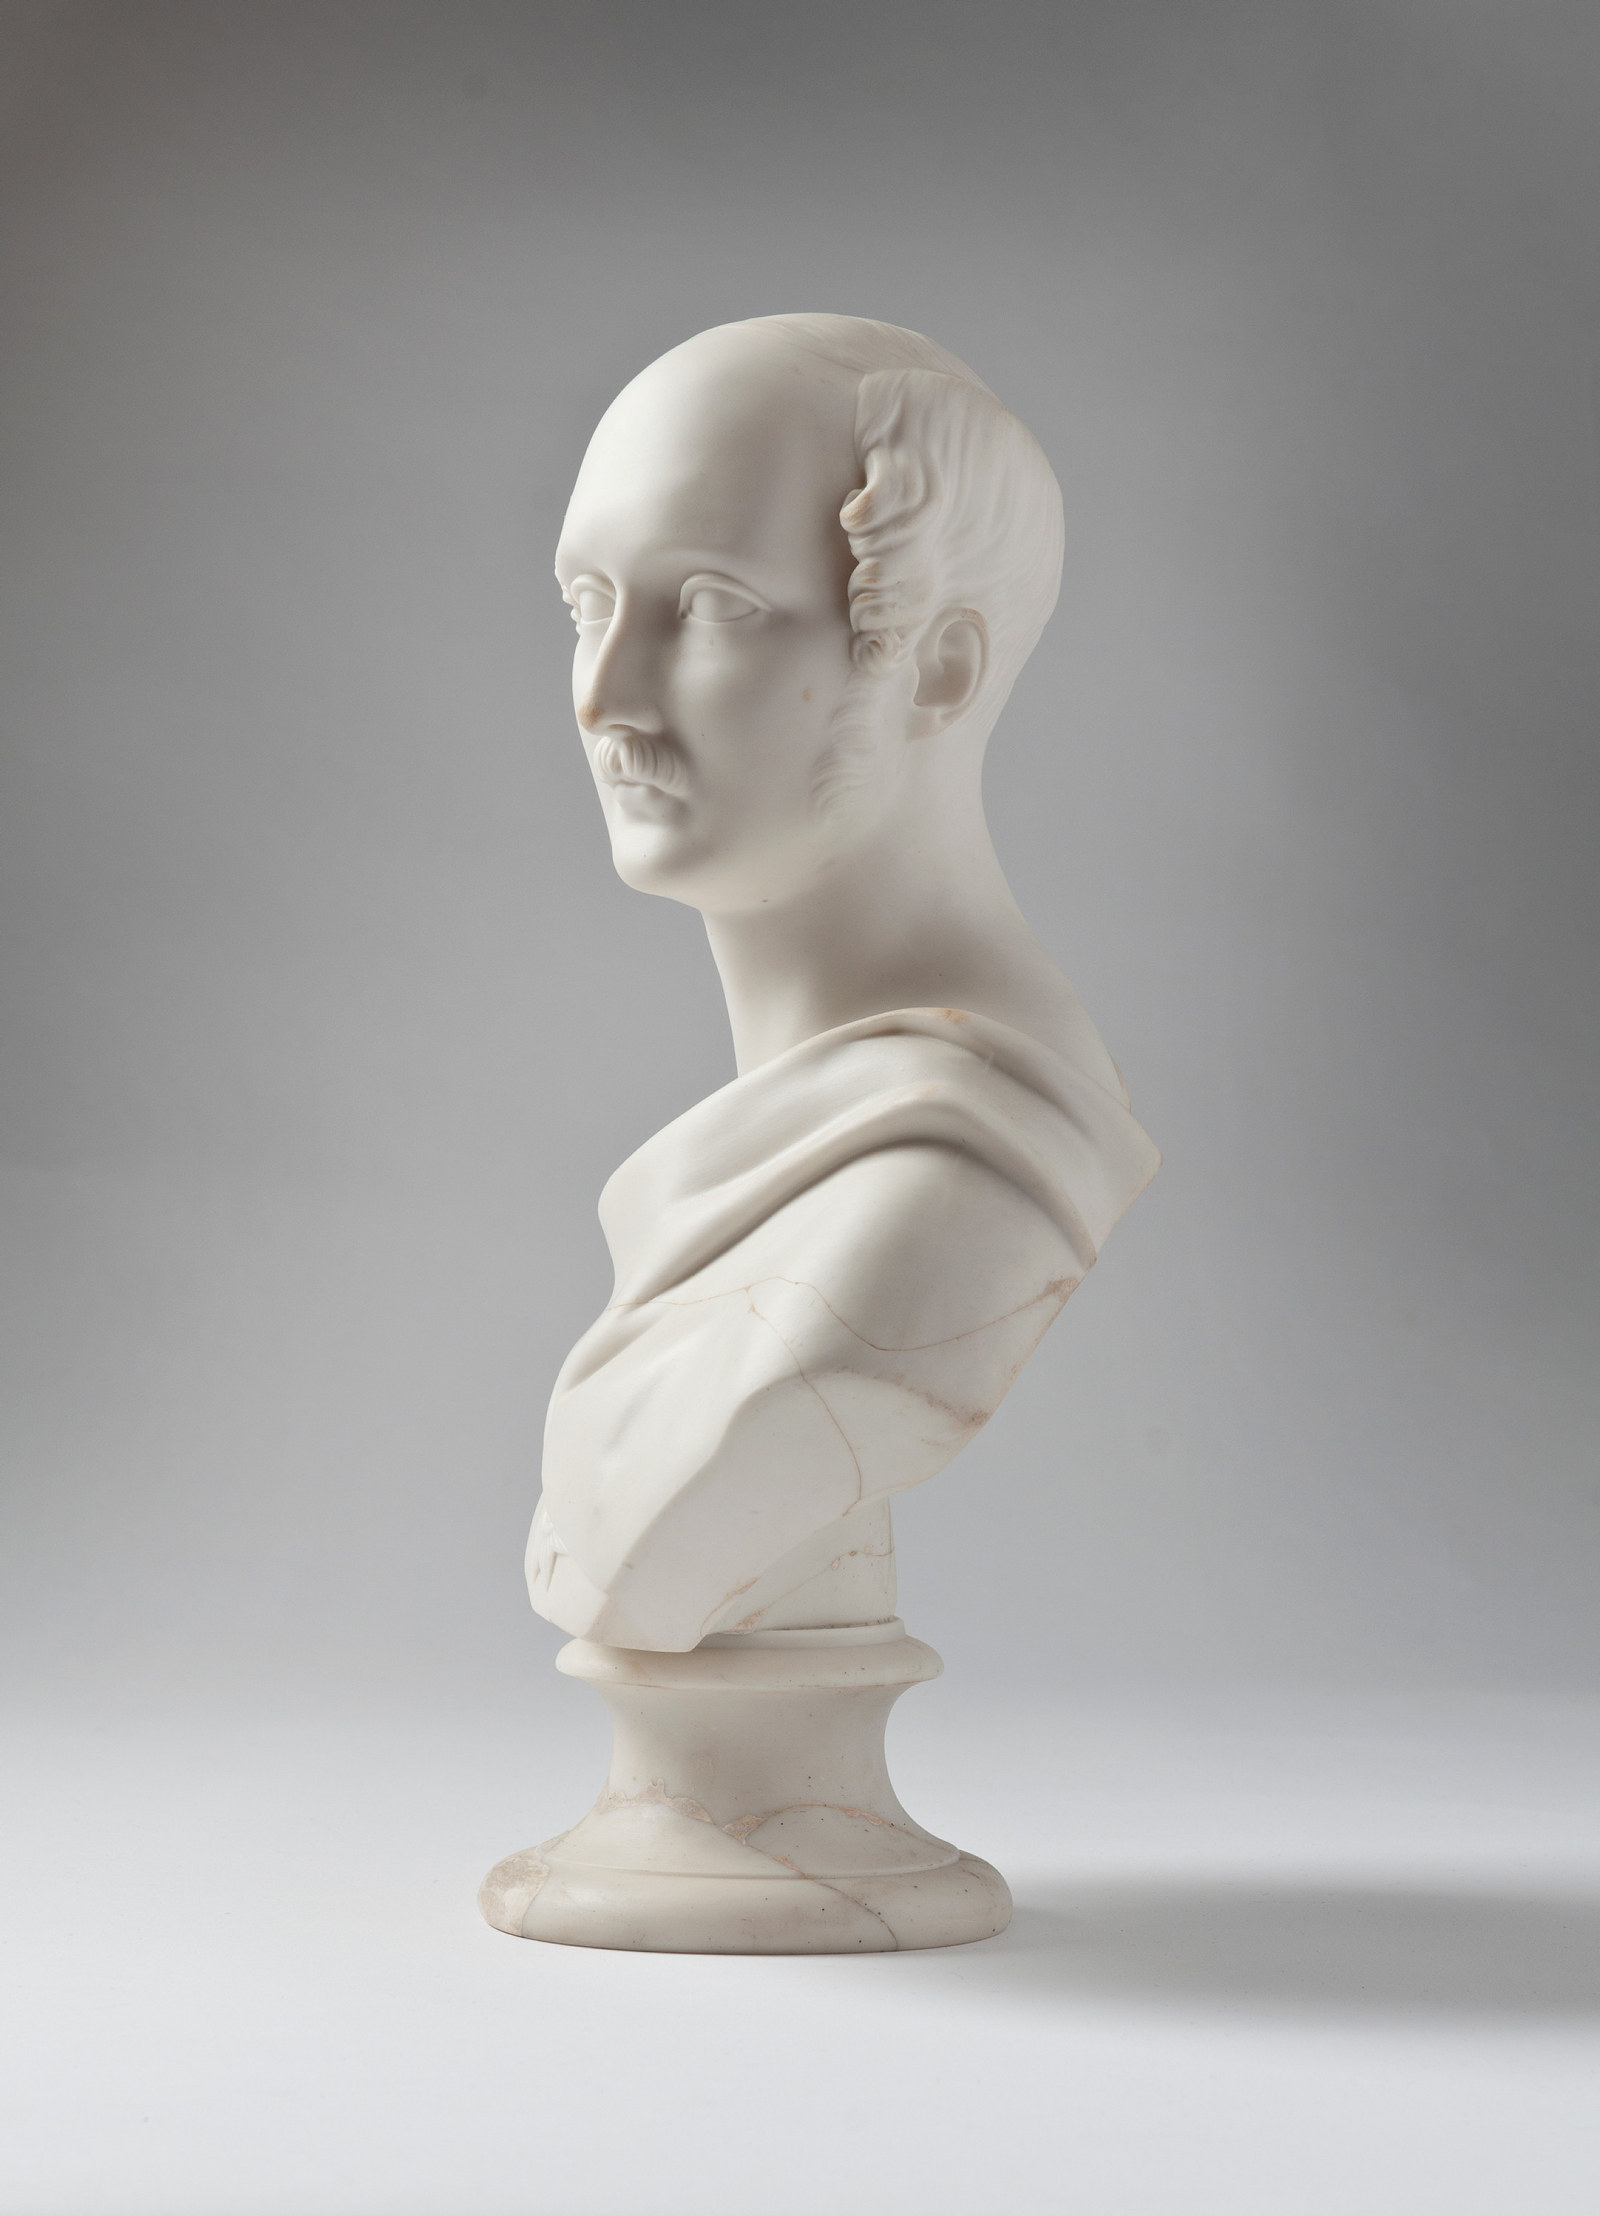 Bust of main in high 3/4 profile, with moustache and sideburns, robed.